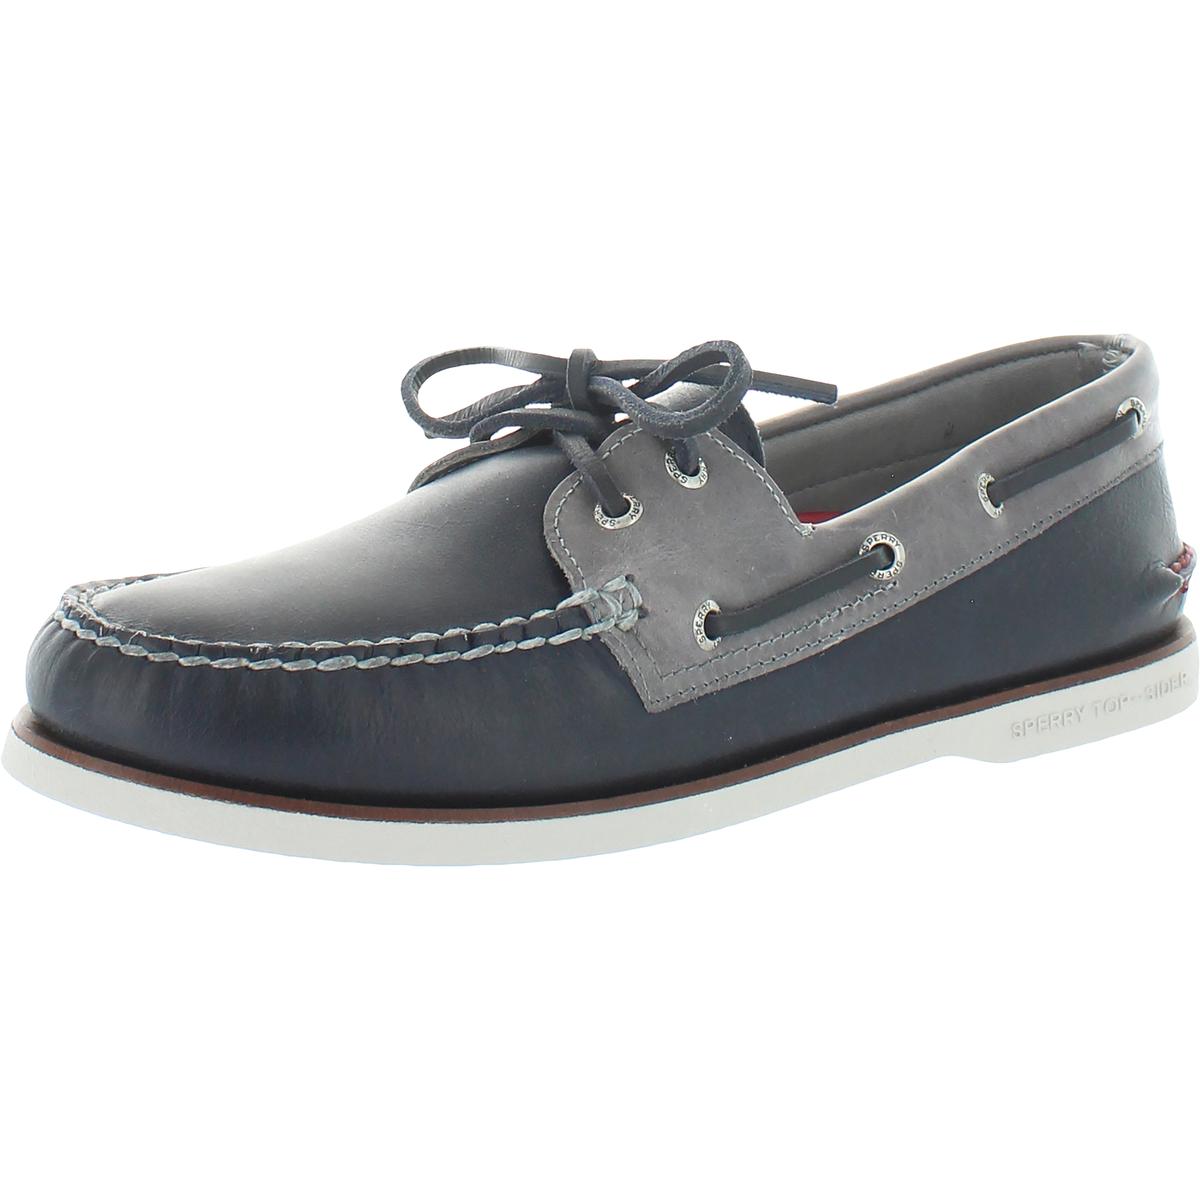 Sperry Mens Authentic Original Navy Boat Shoes Sneakers 9.5 Medium (D ...